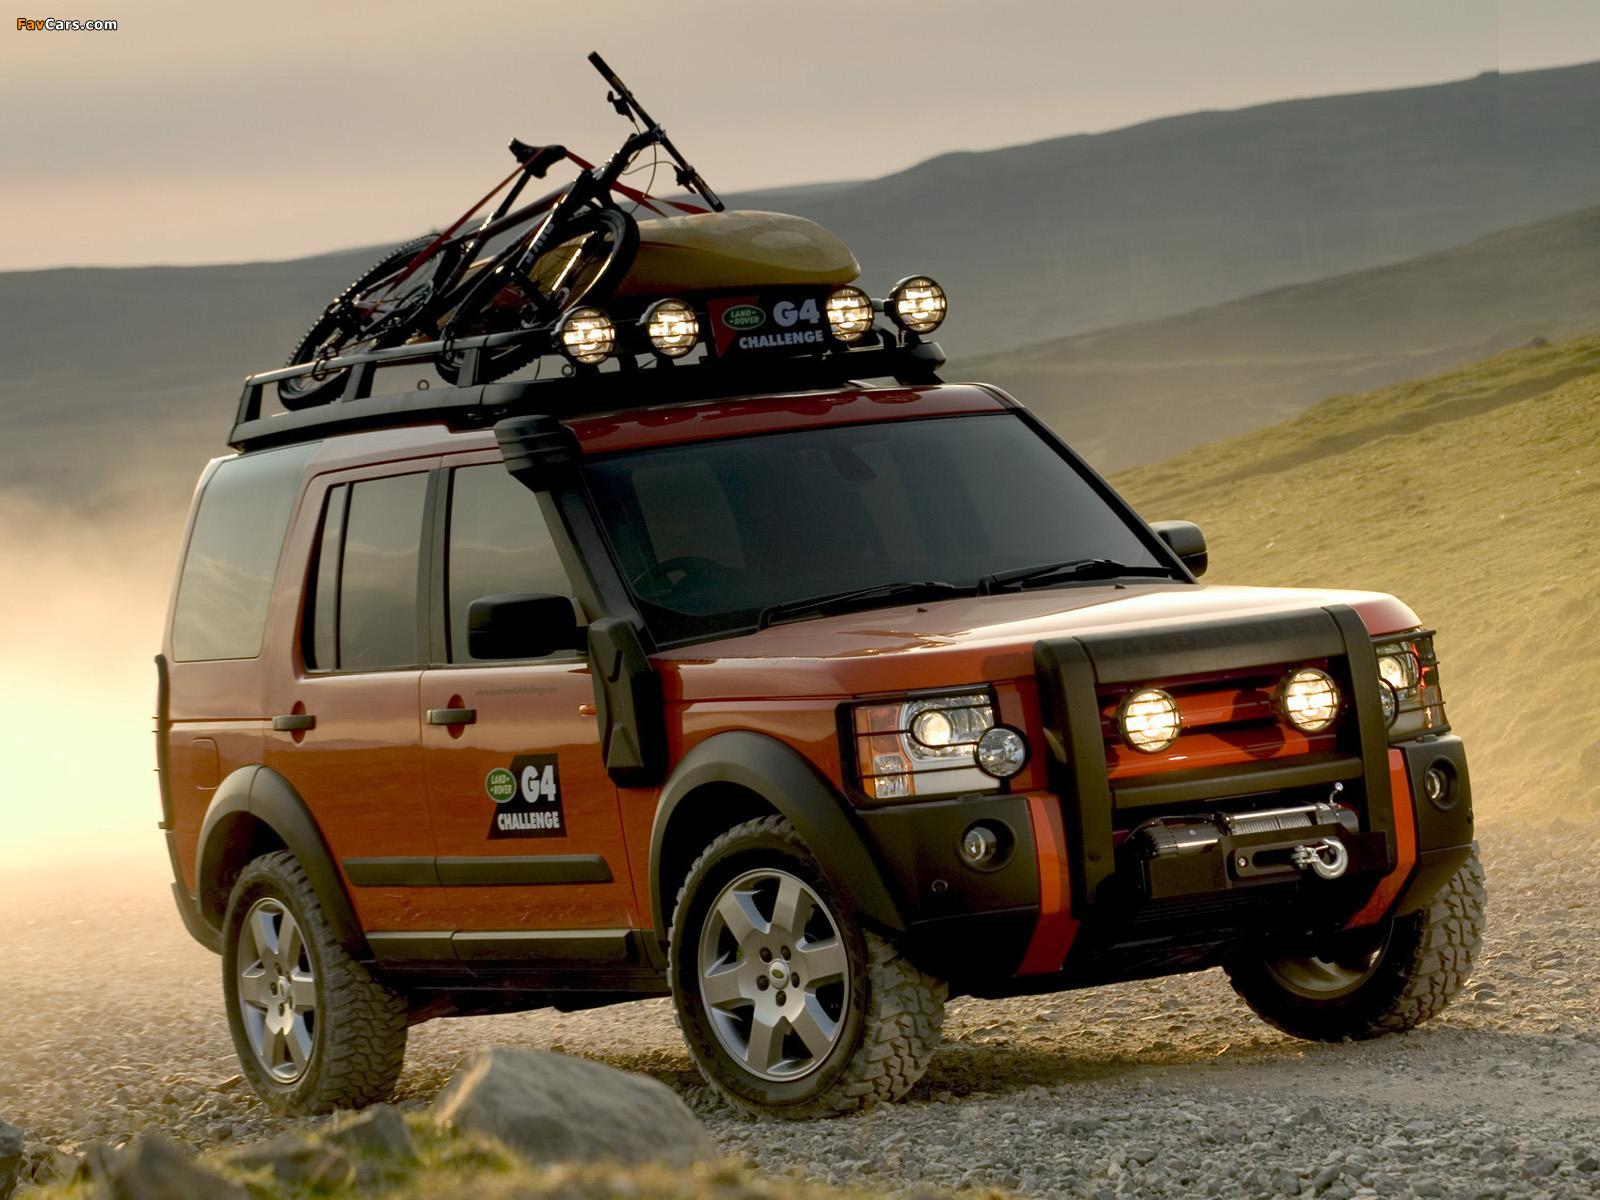 Land Rover Discovery G4 Edition Wallpaper